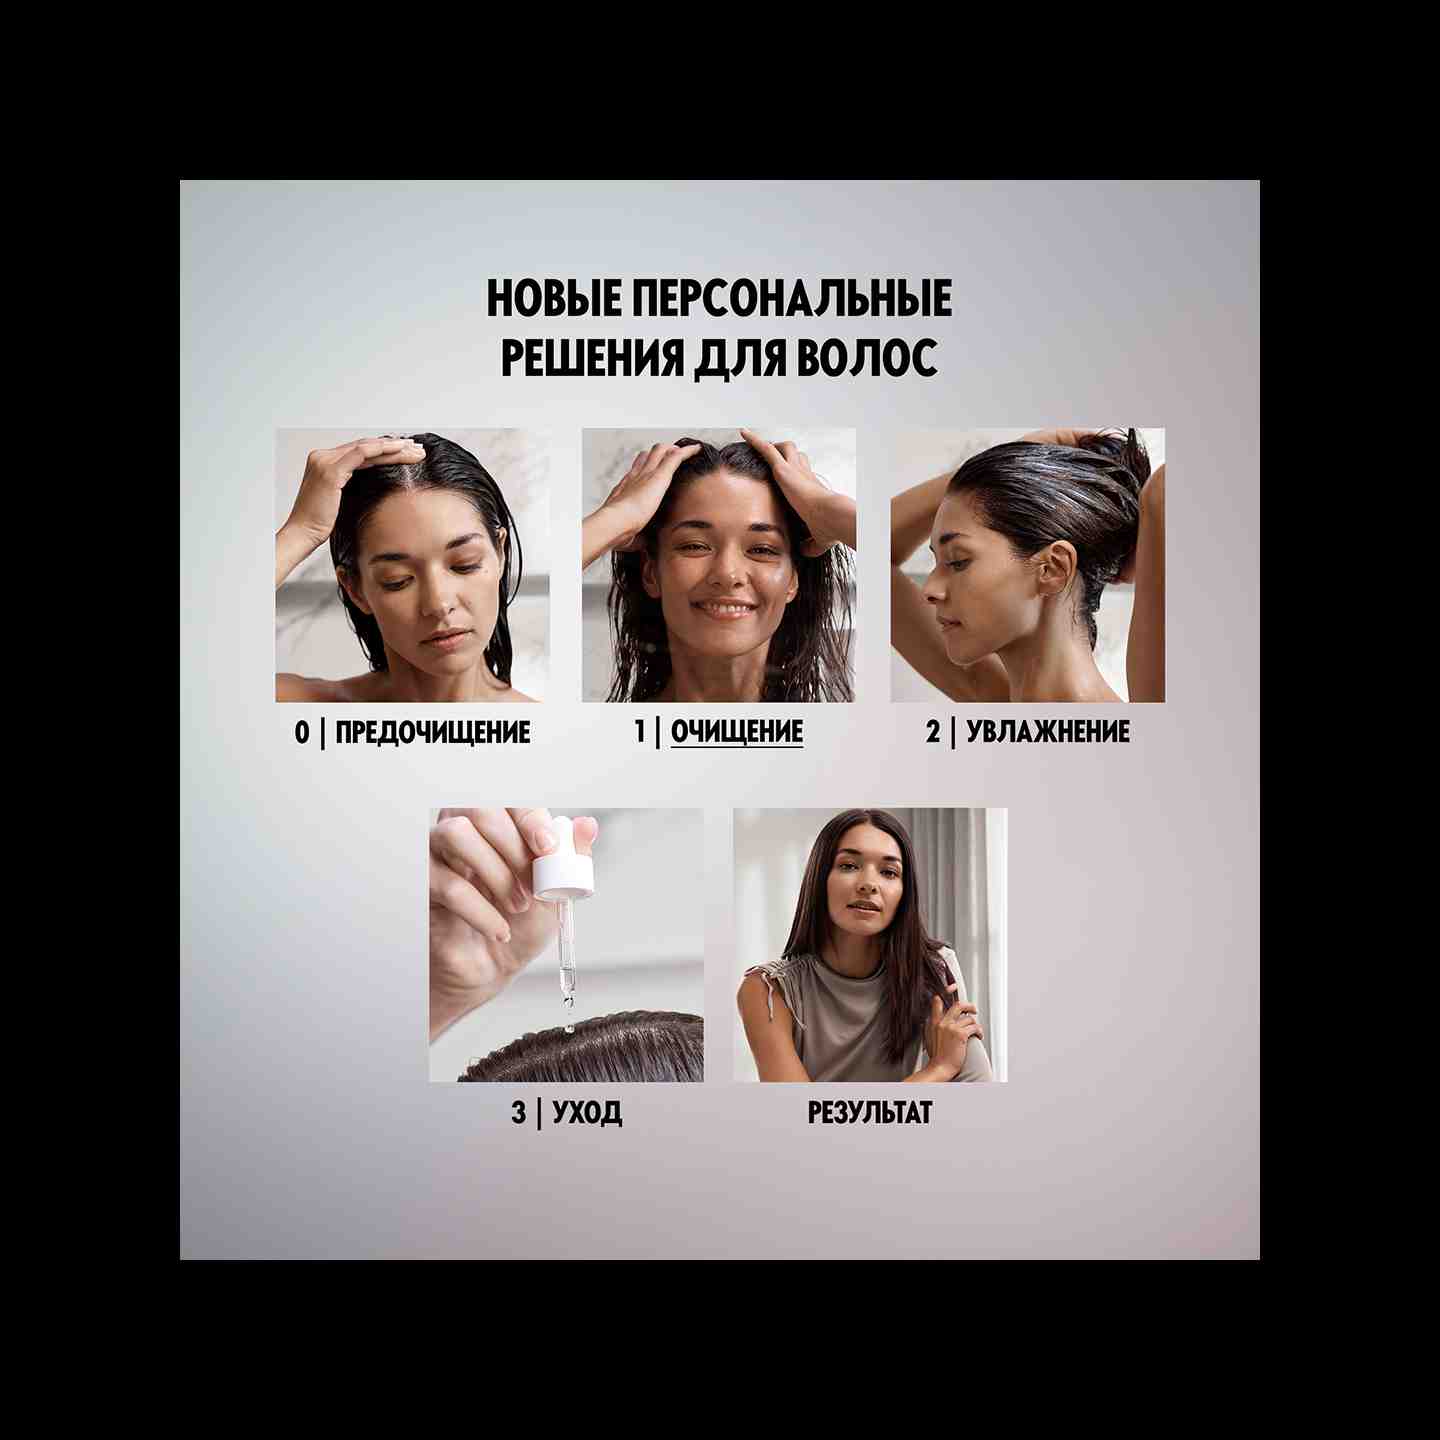 https://media-cdn.oriflame.com/productImage?externalMediaId=product-management-media%2fProducts%2f44950%2fGE%2f44950_7.png&id=17871166&version=1